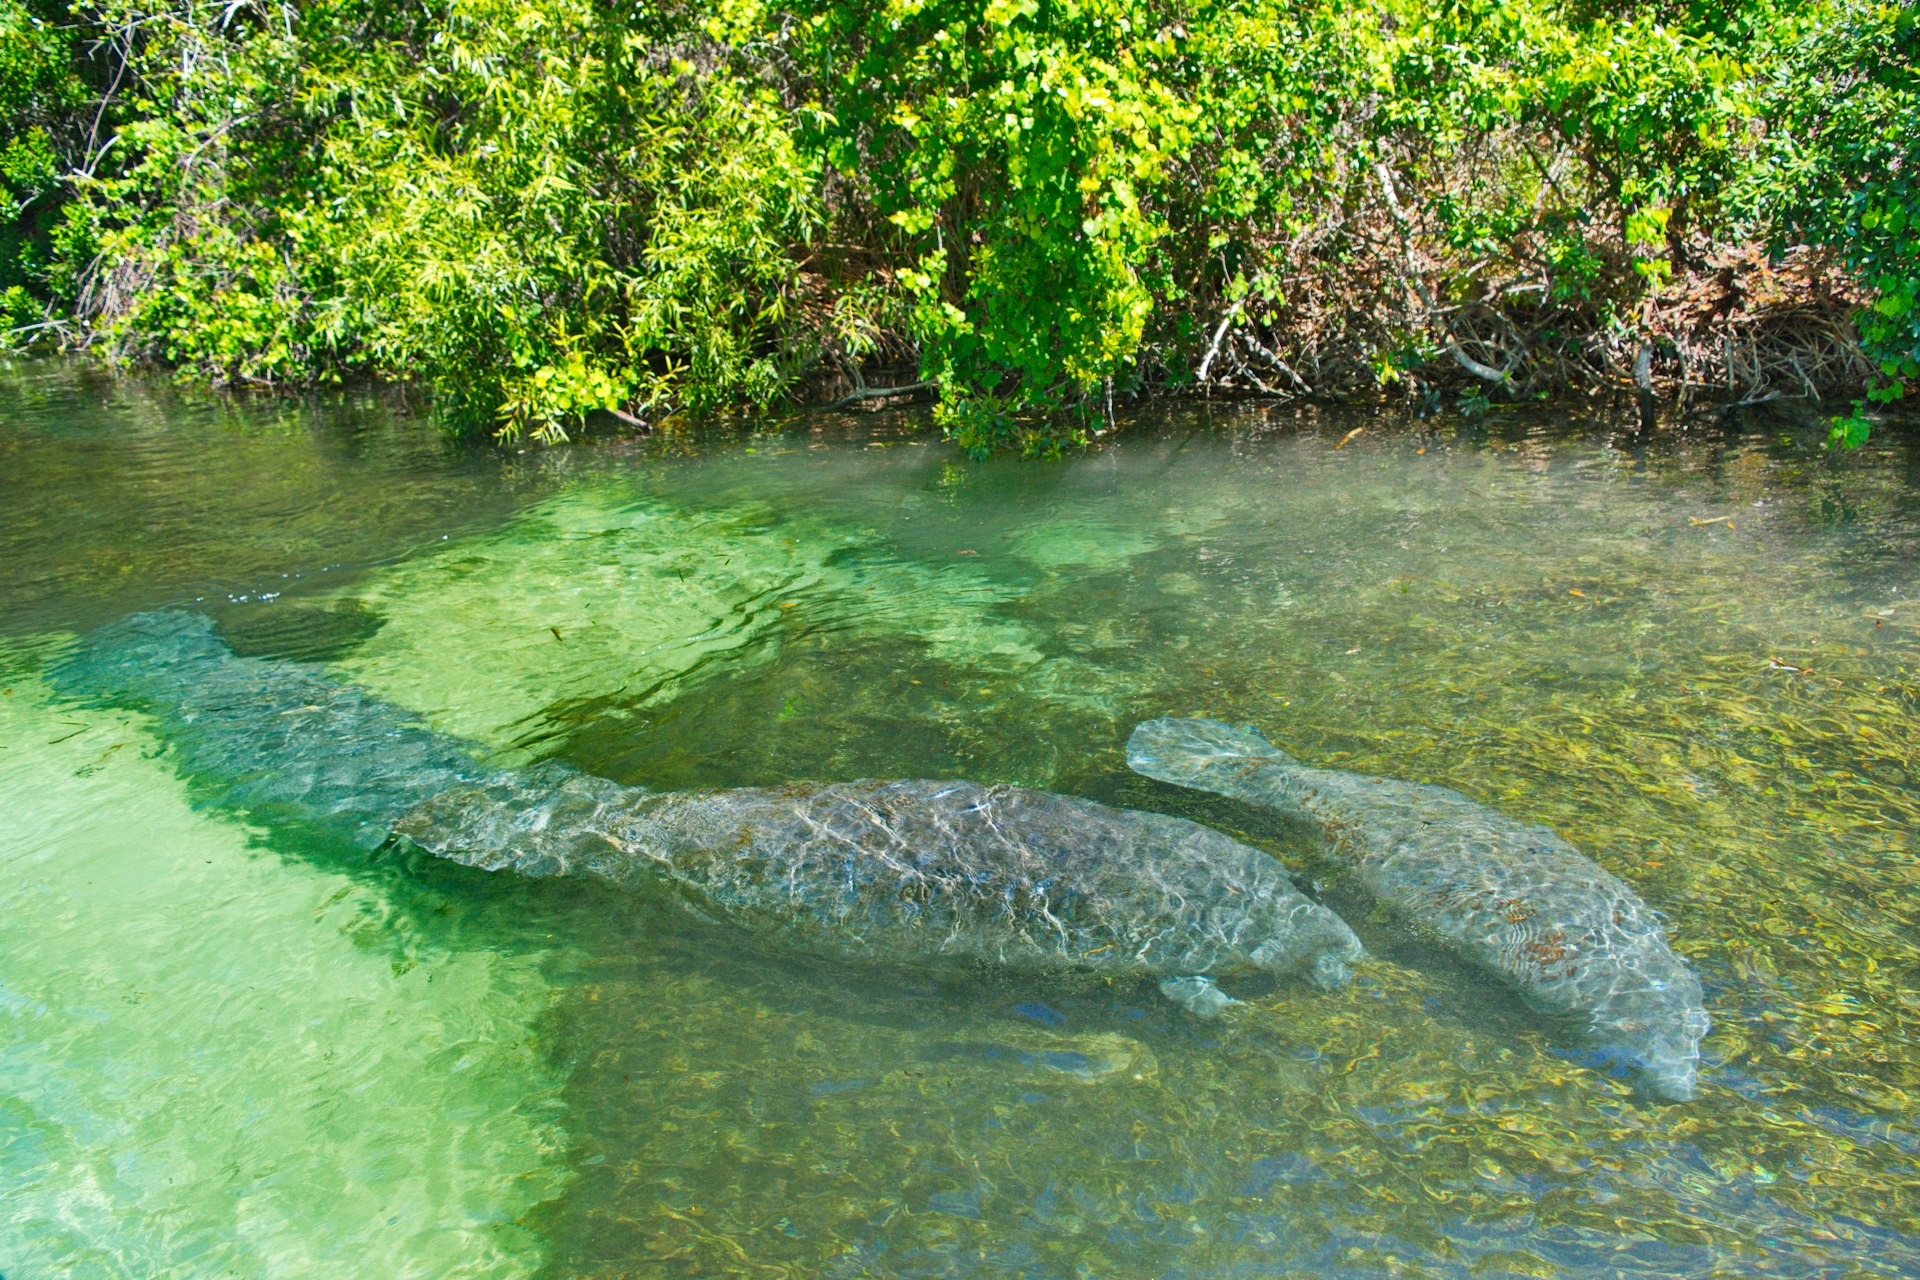 Pair of Manatees swimming in clear water